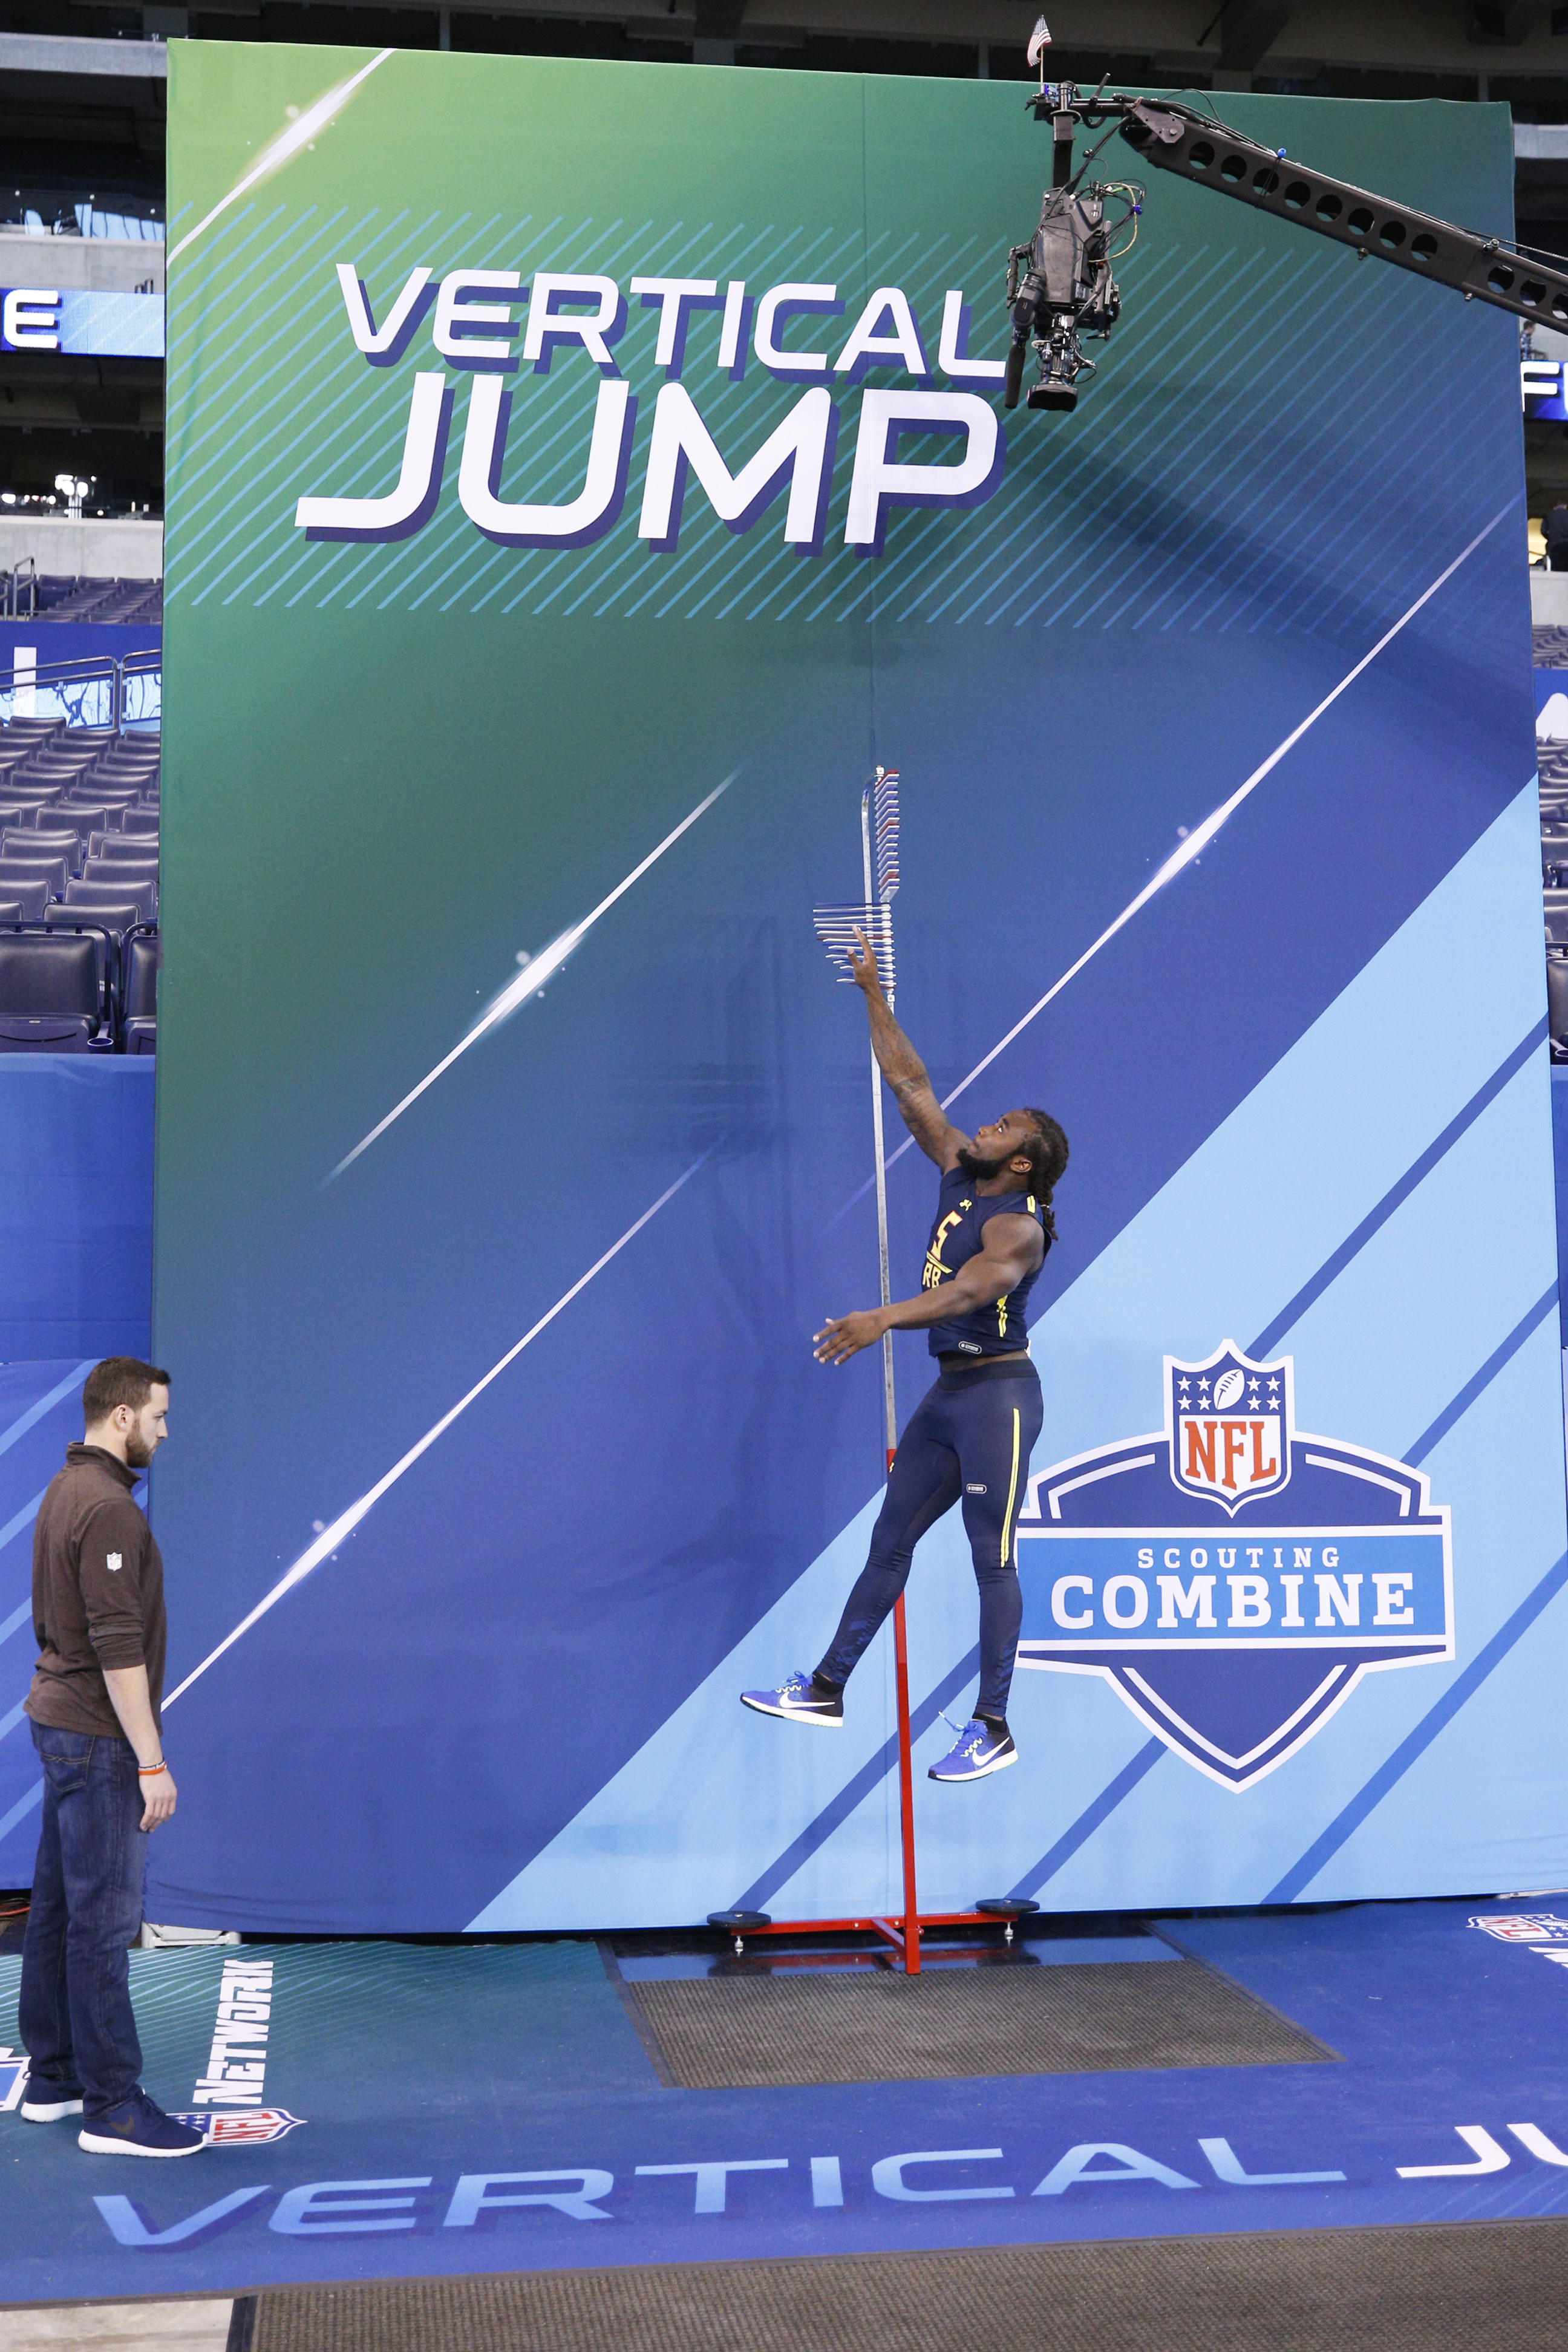 2017 NFL Scouting Combine